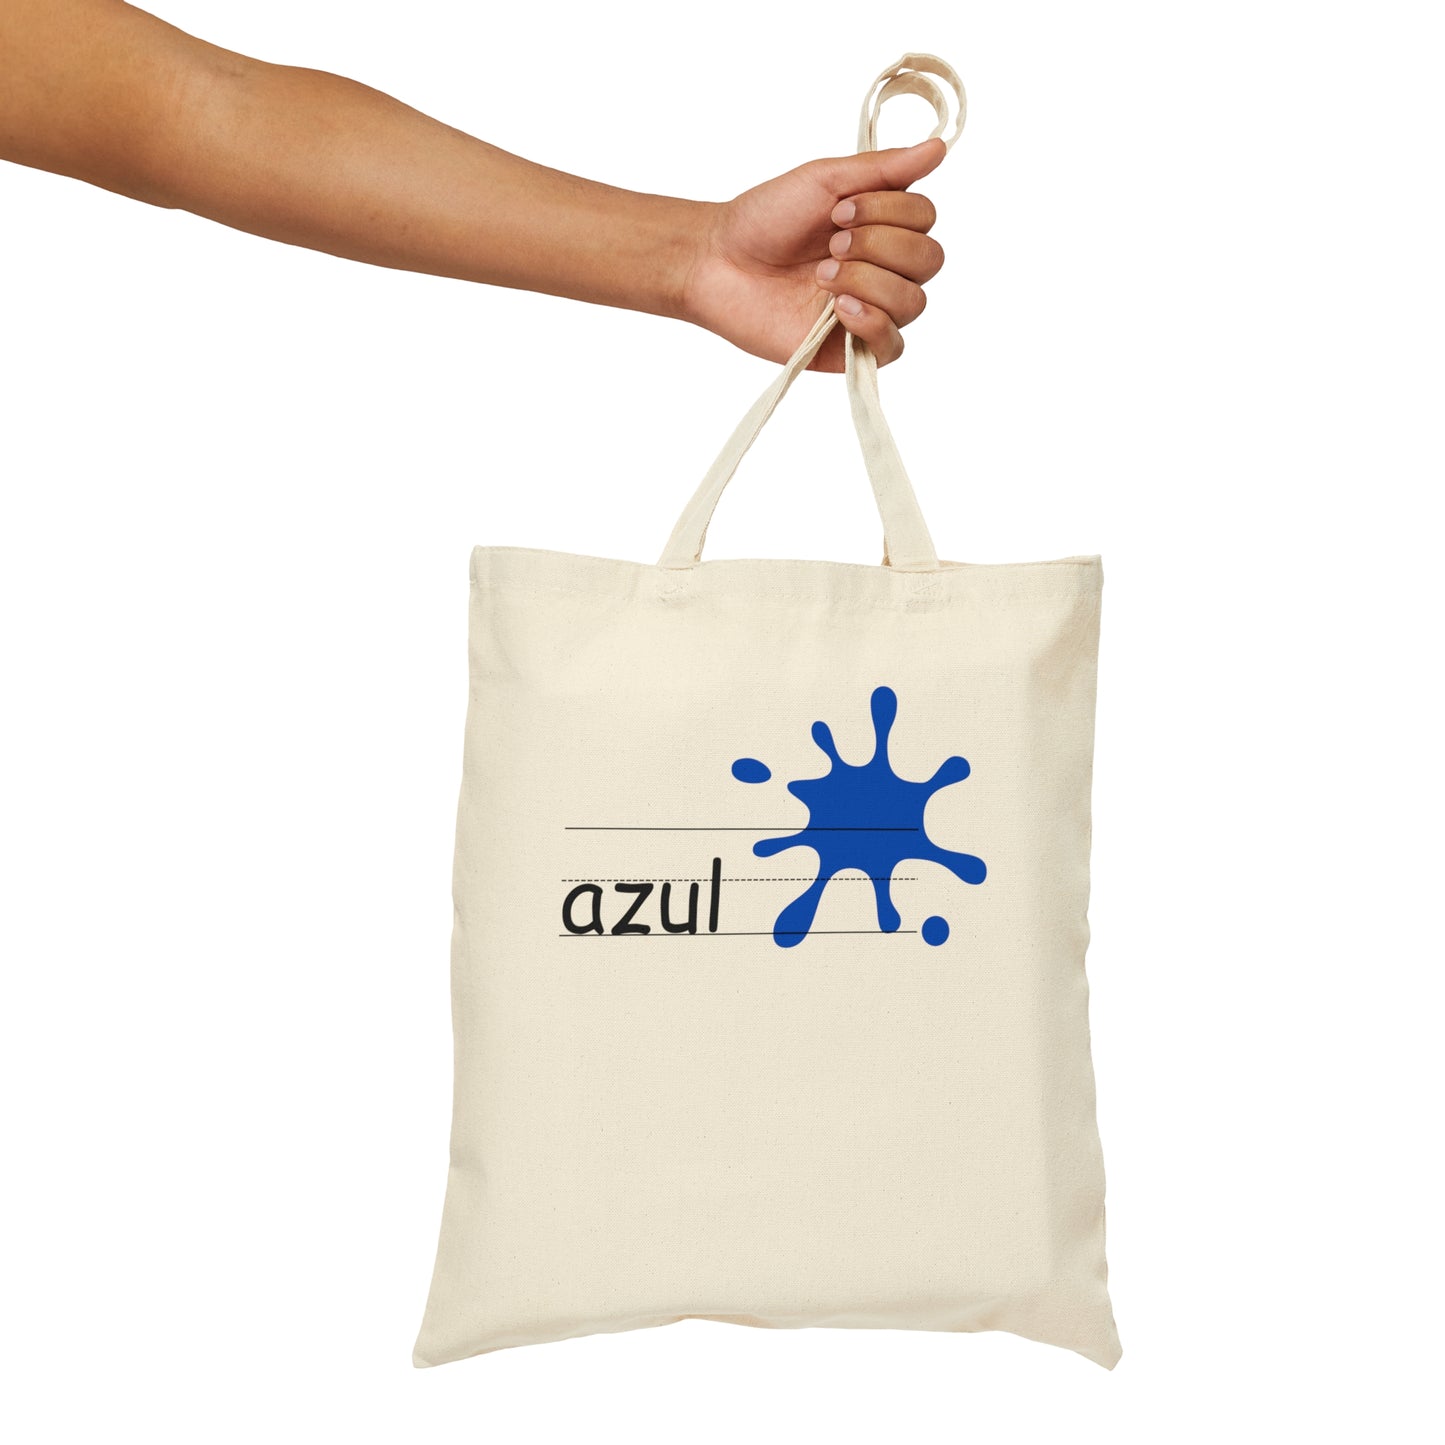 Double Sided Tote Bag: azul and rojo